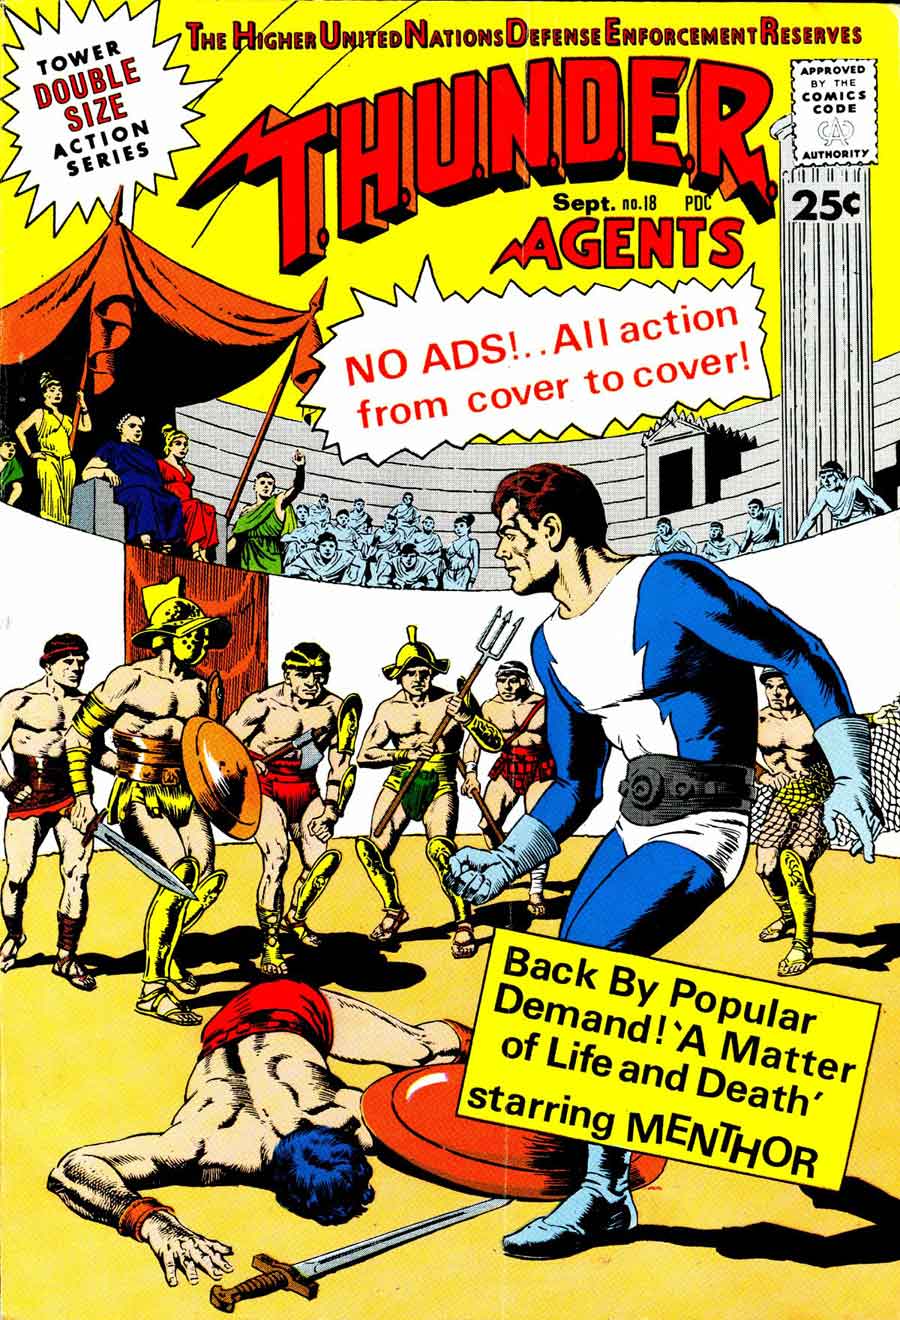 Thunder Agents v1 #18 tower silver age 1960s comic book cover art